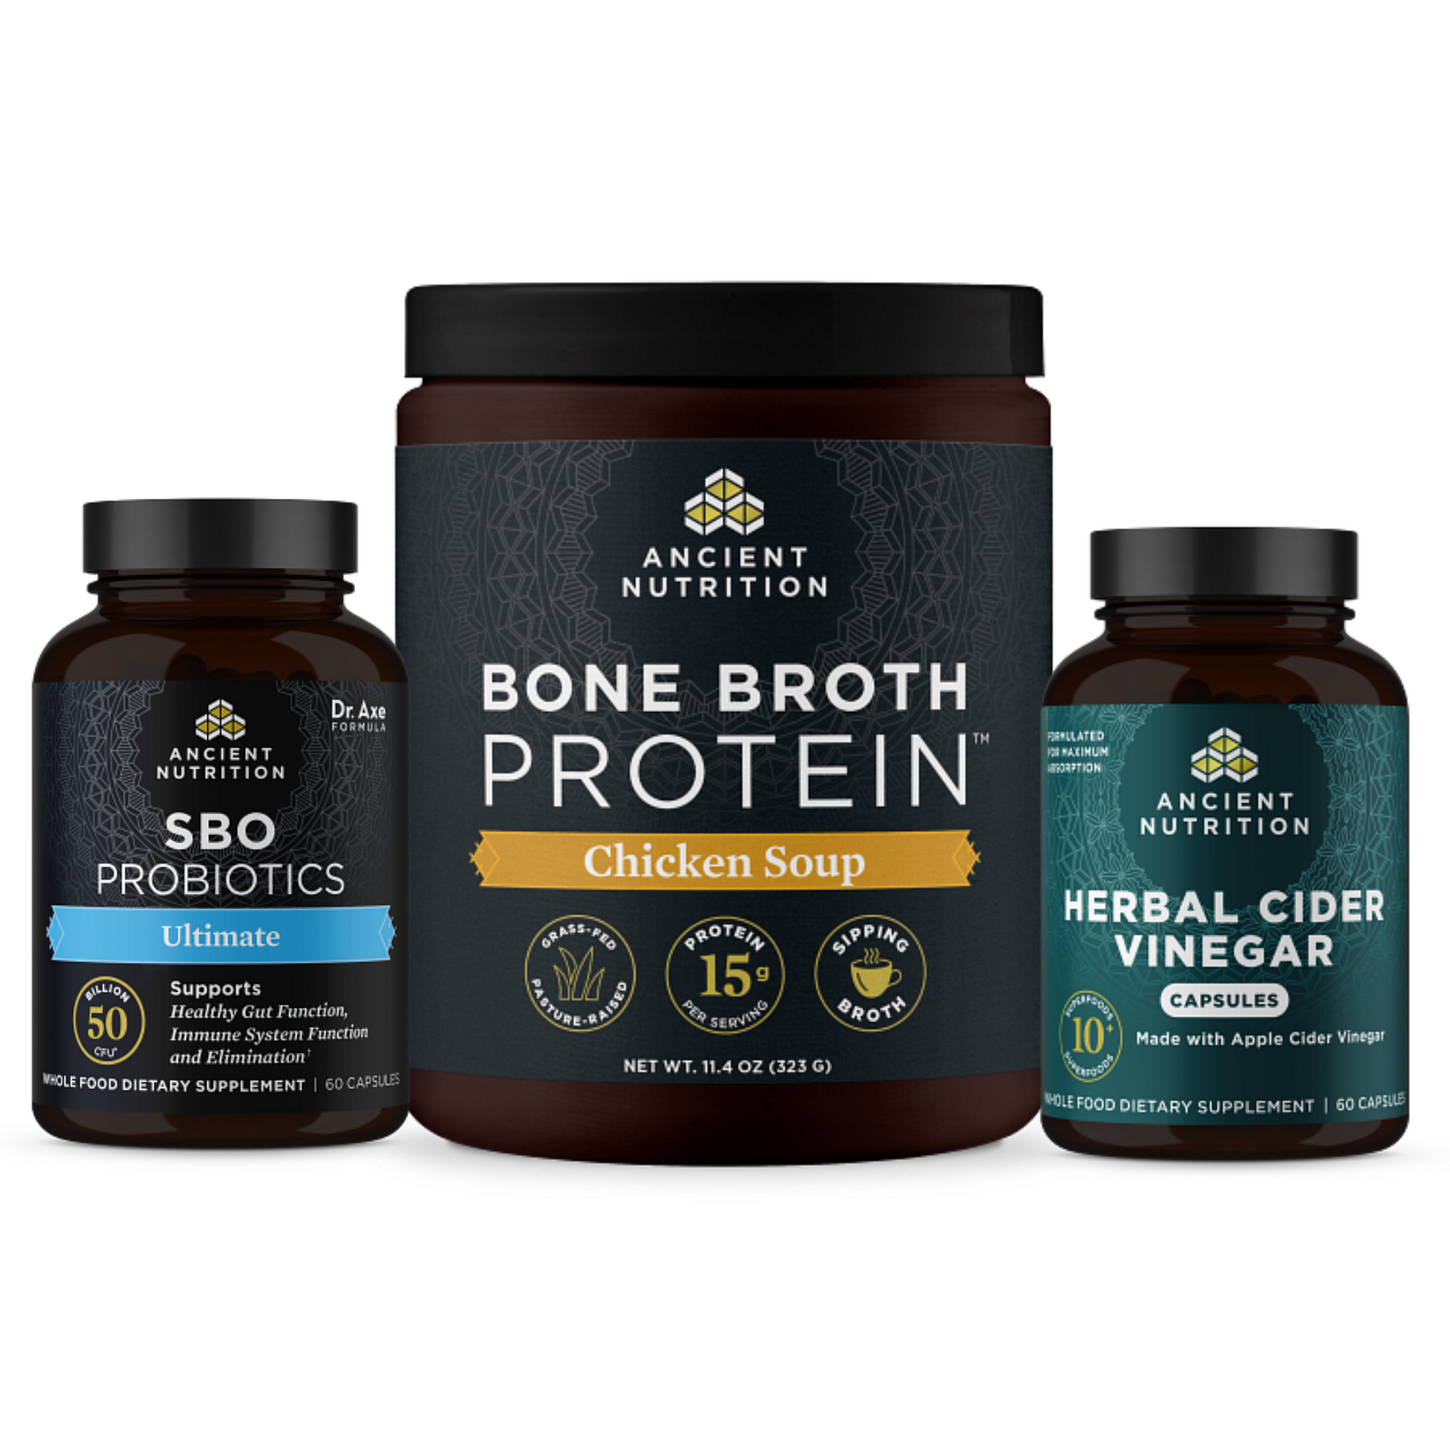 bottles of sbo probiotics ultimate, bone broth protein chicken soup and herbal cider vinegar capsules with blue bow